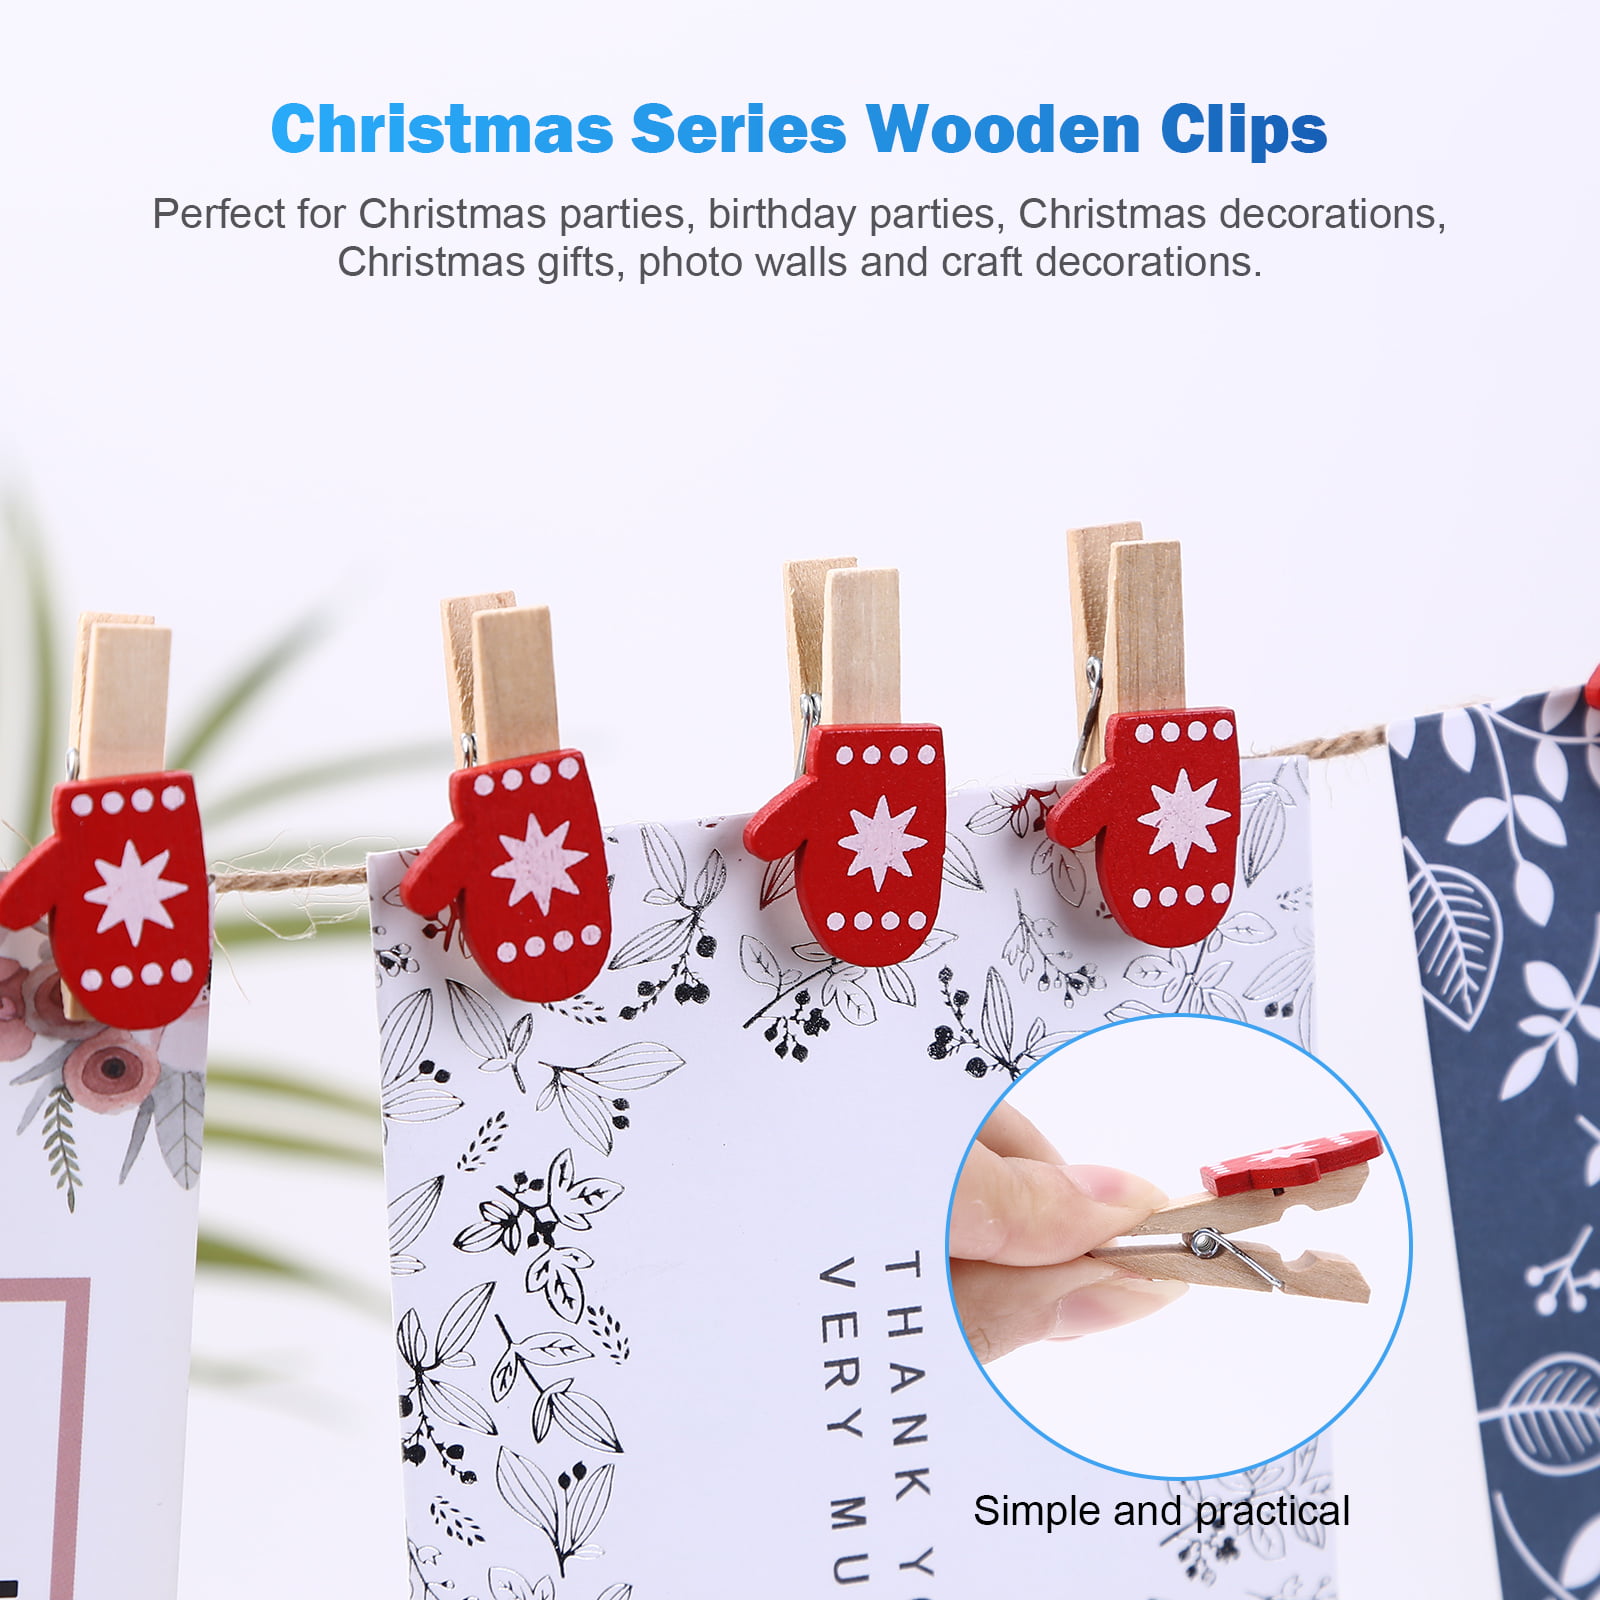 Christmas Photo Clips Wood Craft Pegs Christmas Paper Peg Wood Clothespins for Christmas Wedding Holiday Party Supplies DIY Craft Decoration Random style Frgasgds 50 Pieces Christmas Wooden Clips